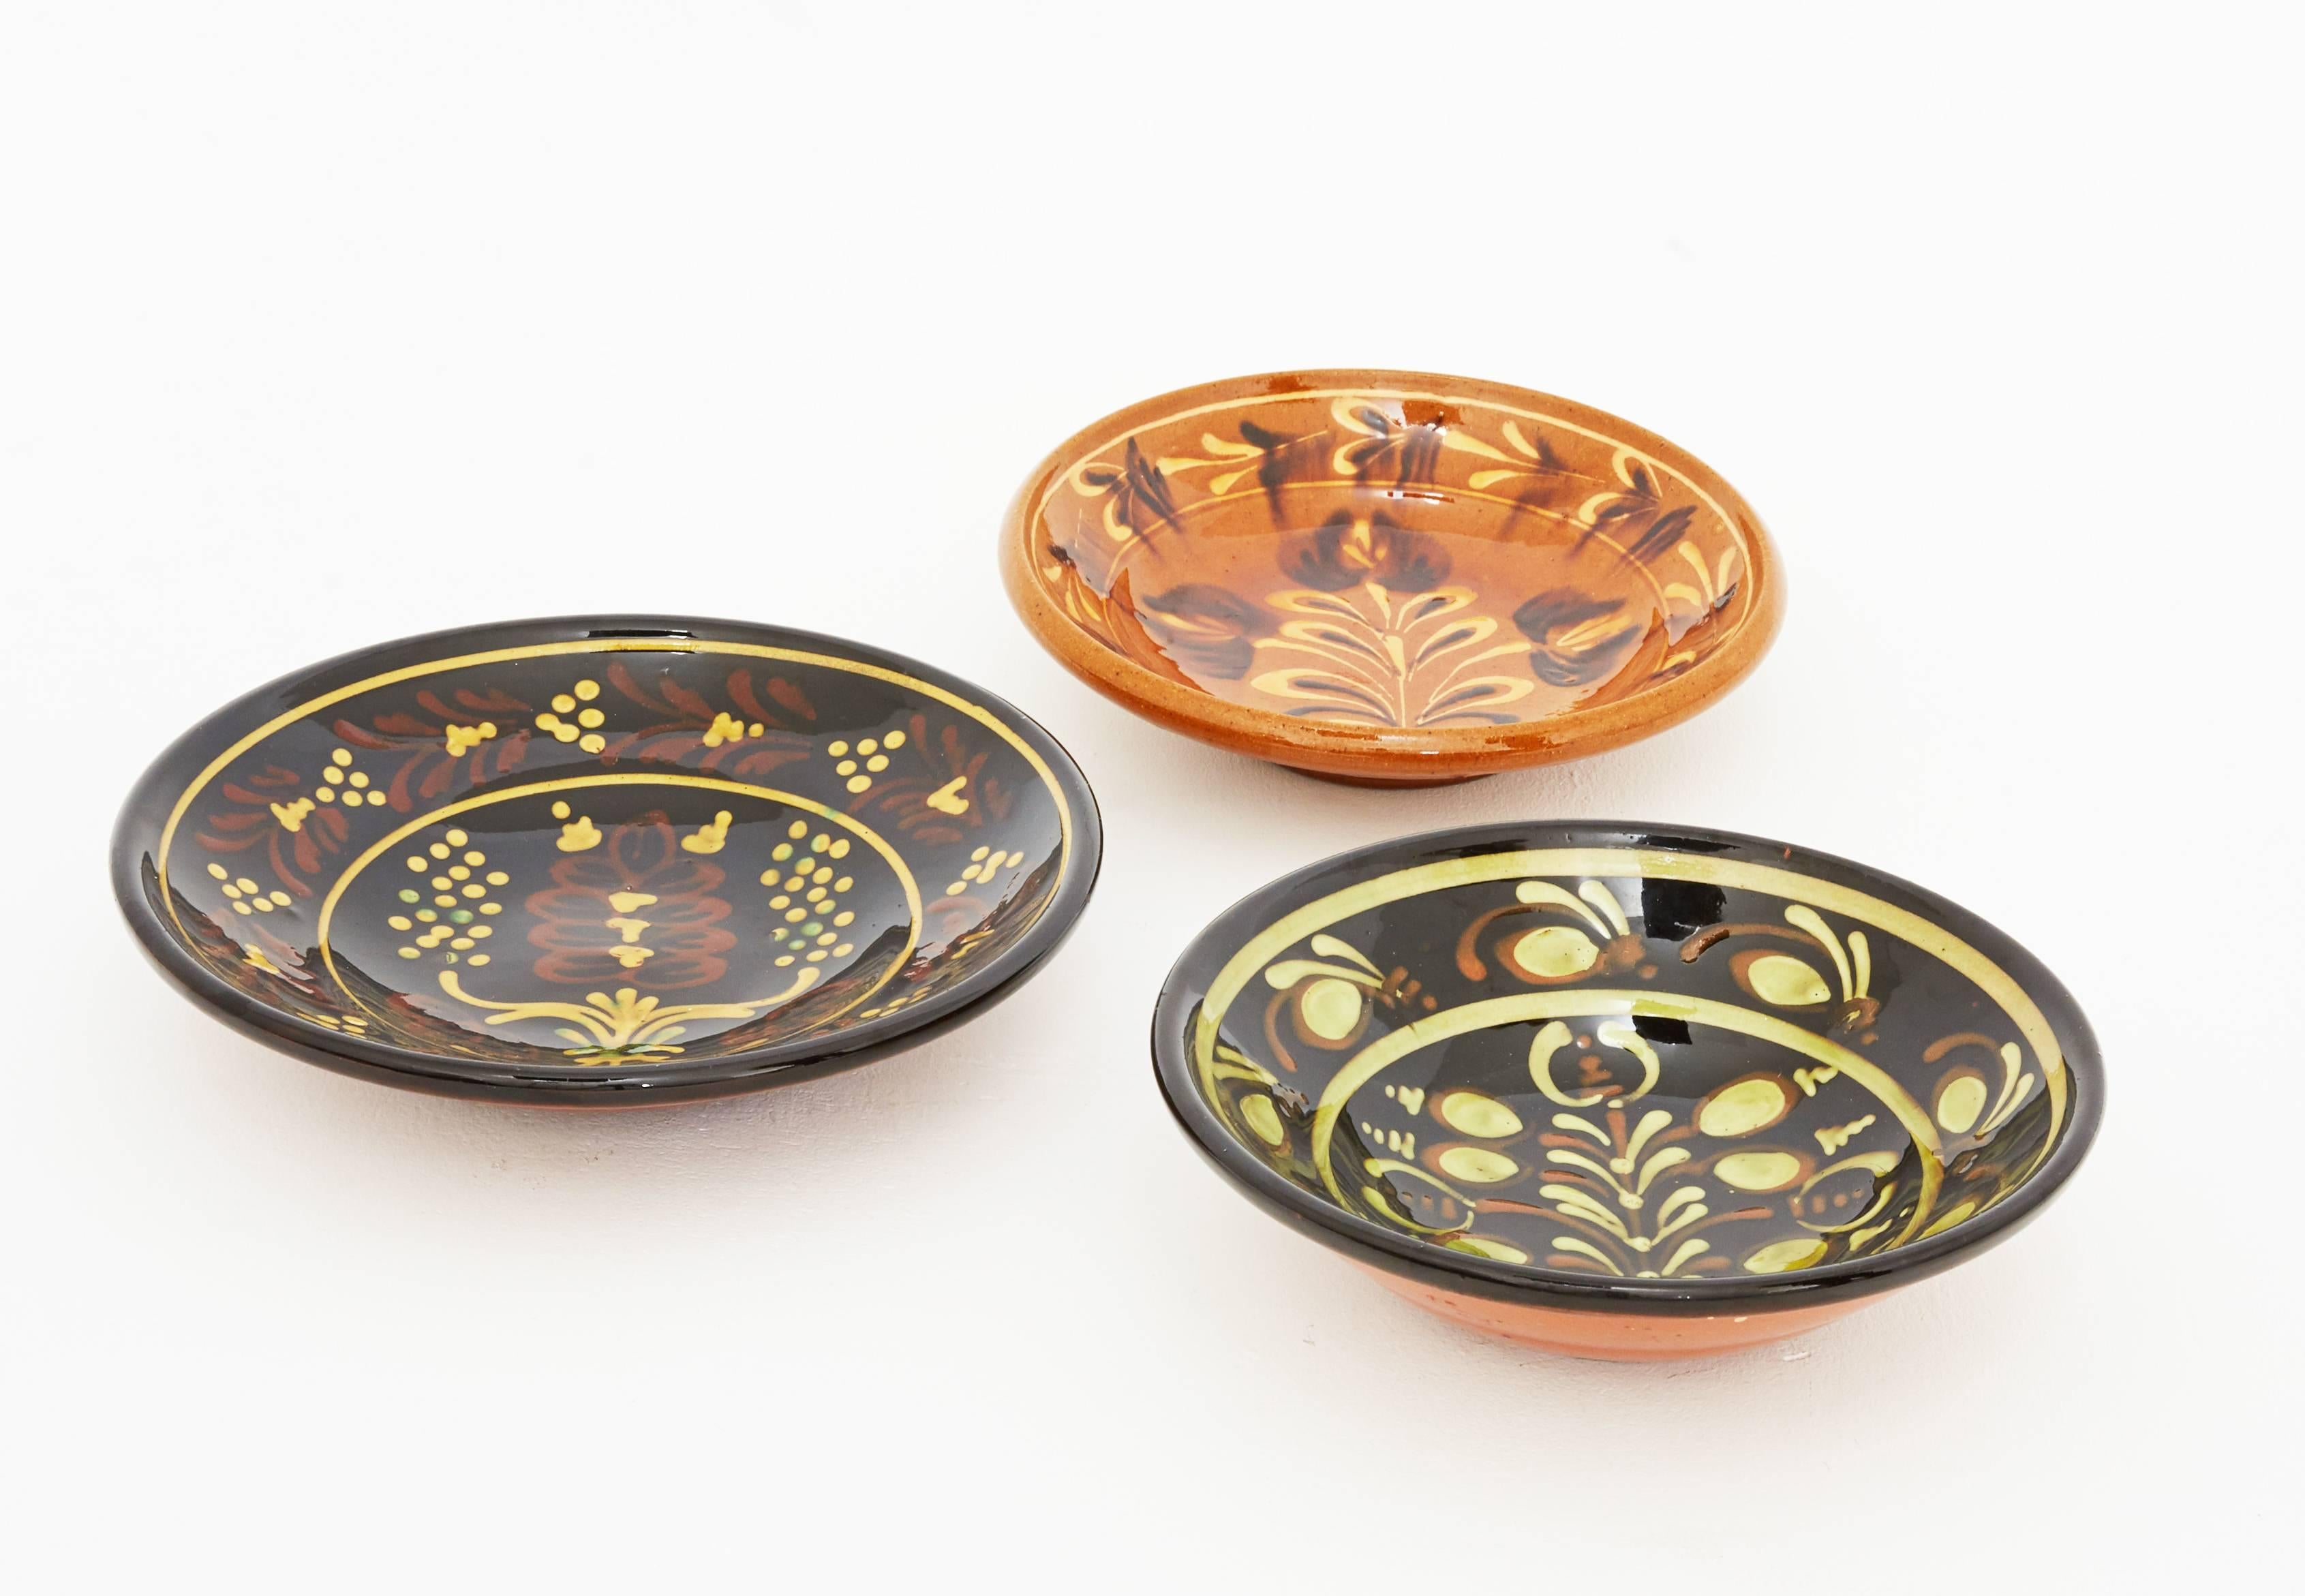 Set of three vintage Hungarian hand-painted plates. These three bowls have a typical decorative motif of the Eastern European terracotta craft tradition. They are glazed and hand-painted and in immaculate conditions. They can be used as serving